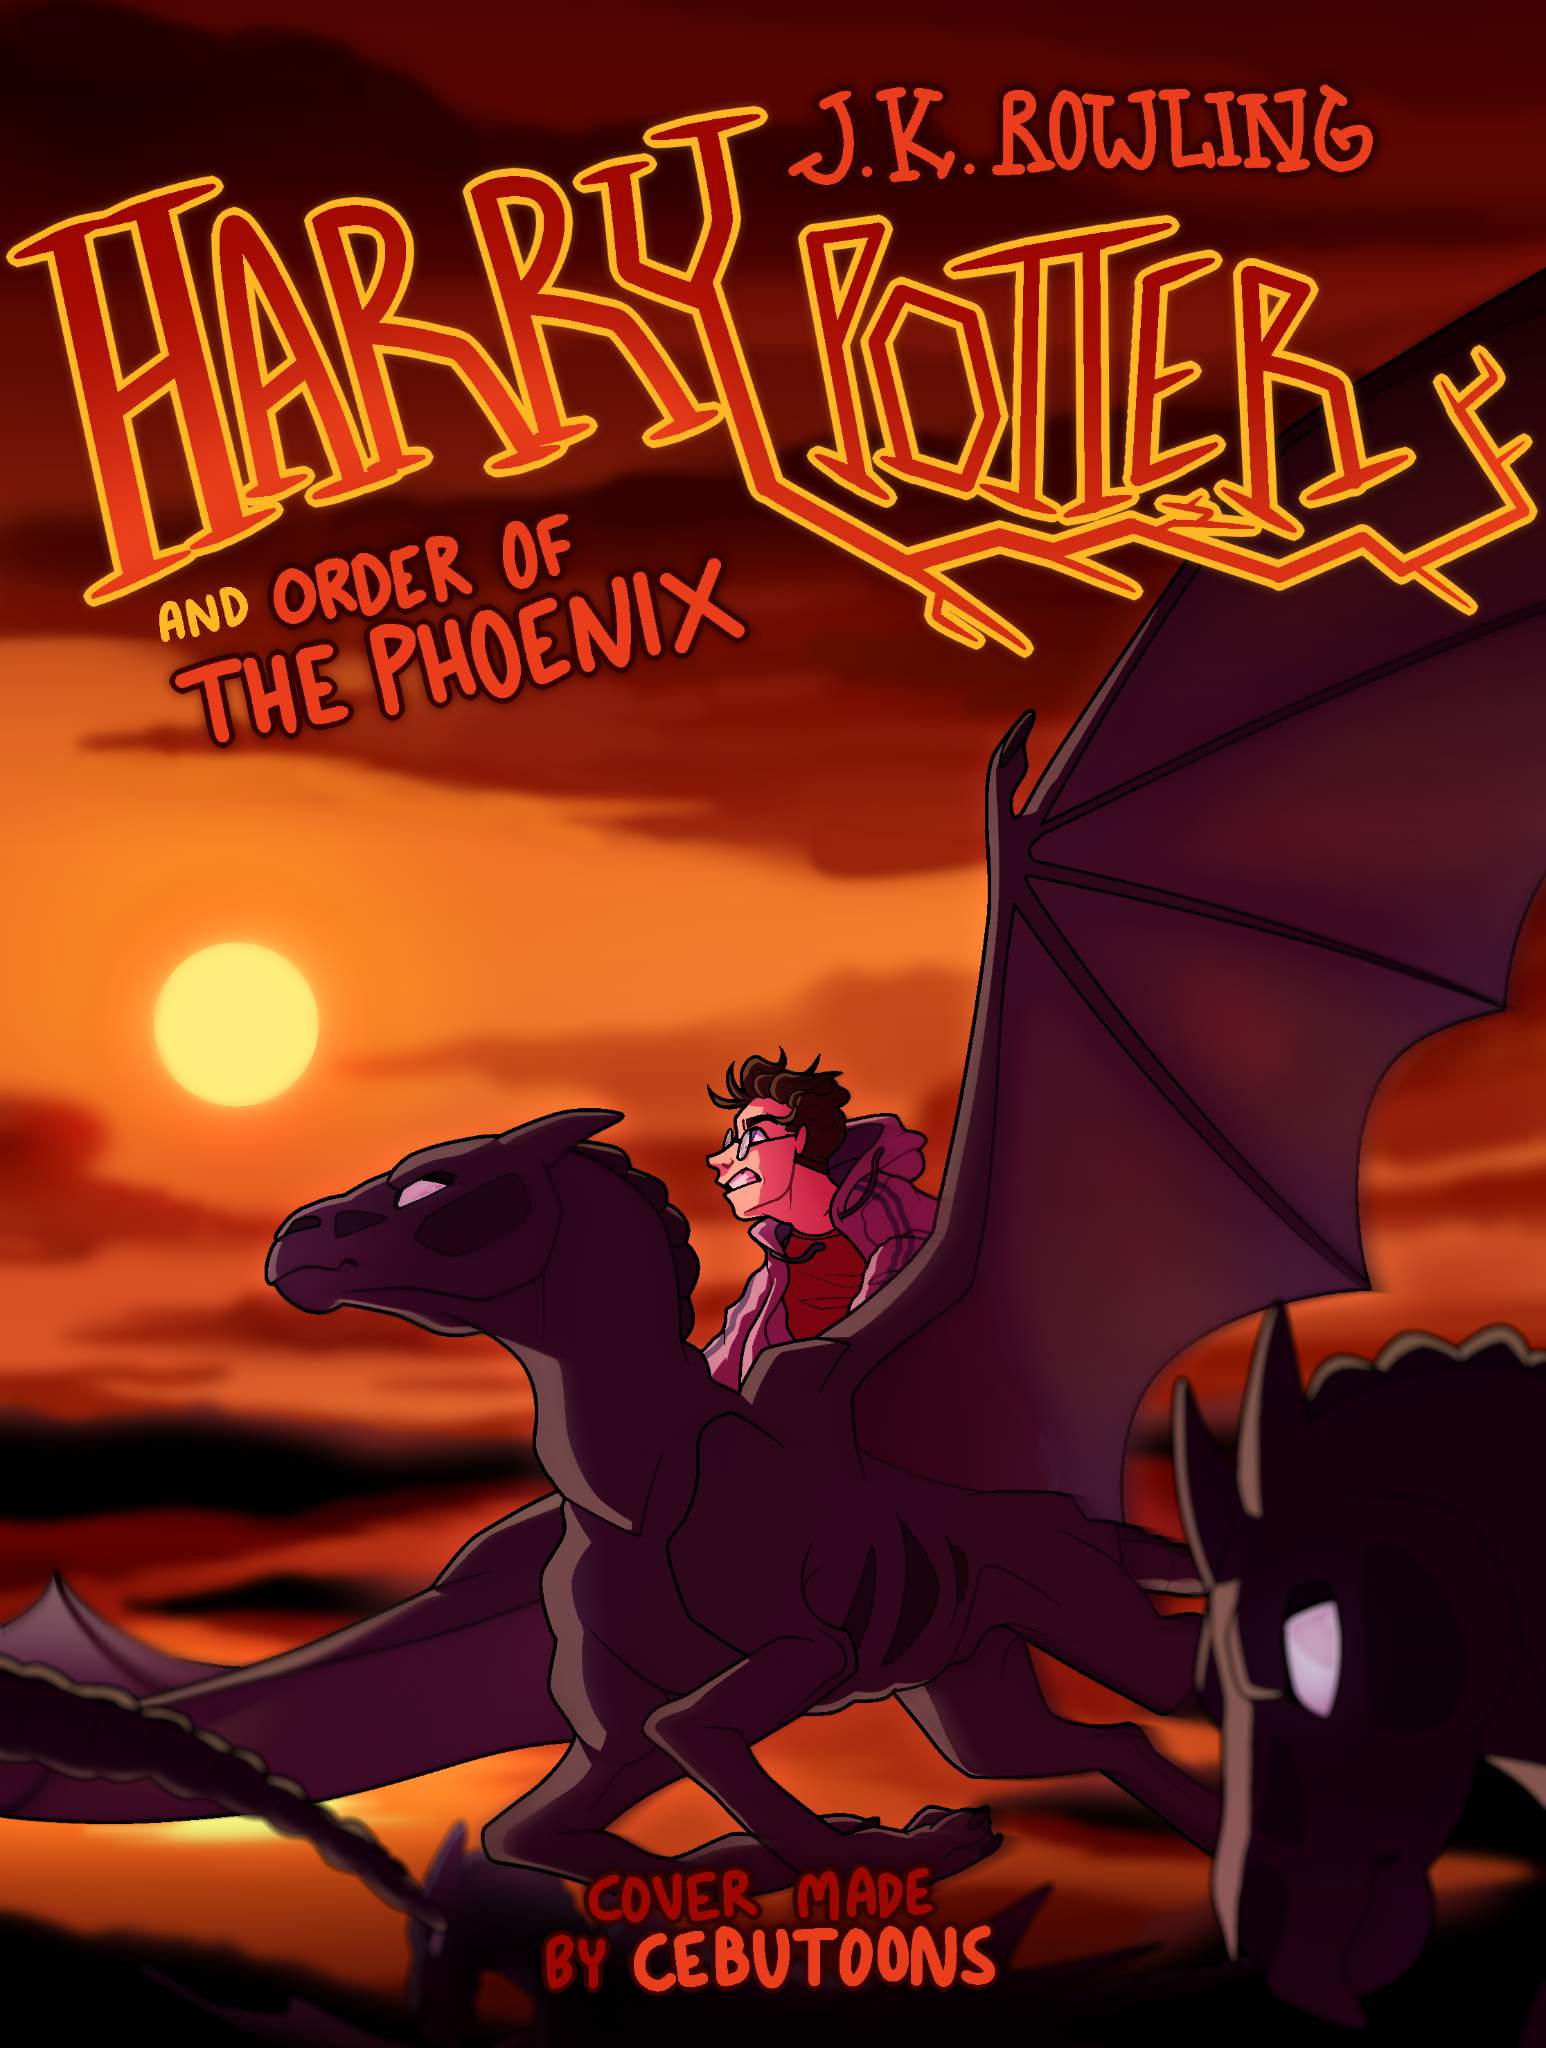 Harry potter order of the phoenix book cover - angryfod